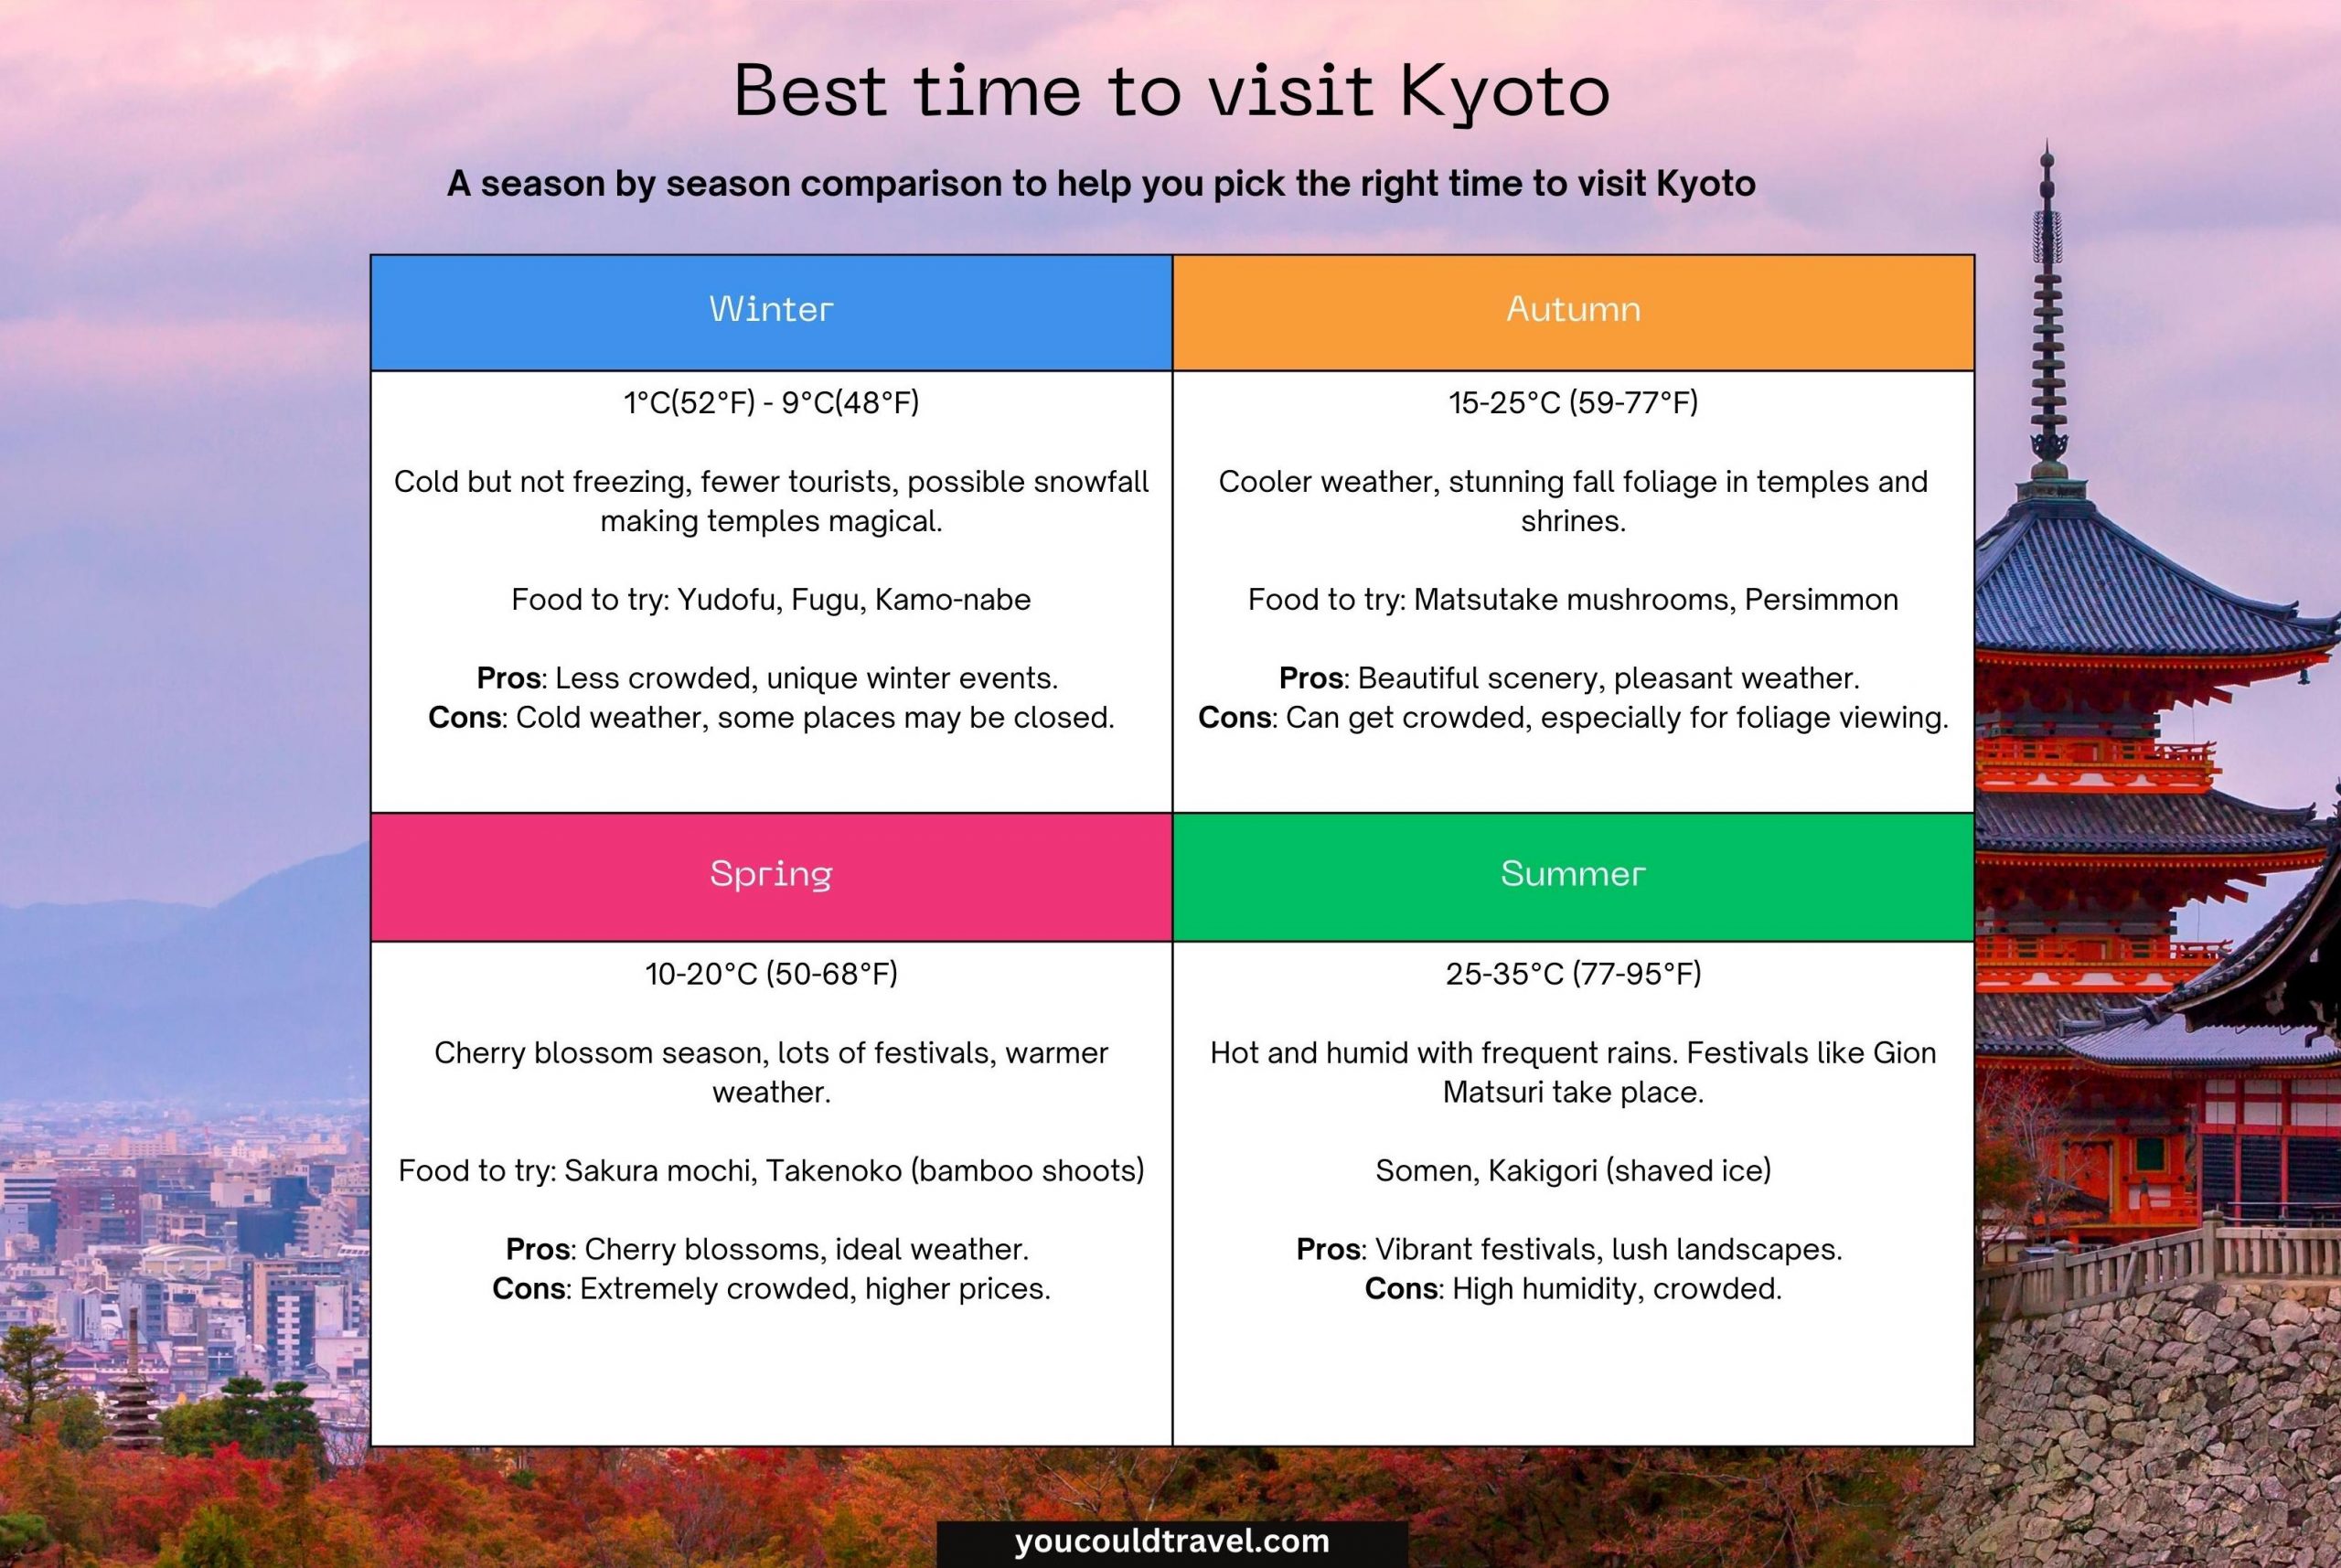 Best time to visit Kyoto, a seasonal graph